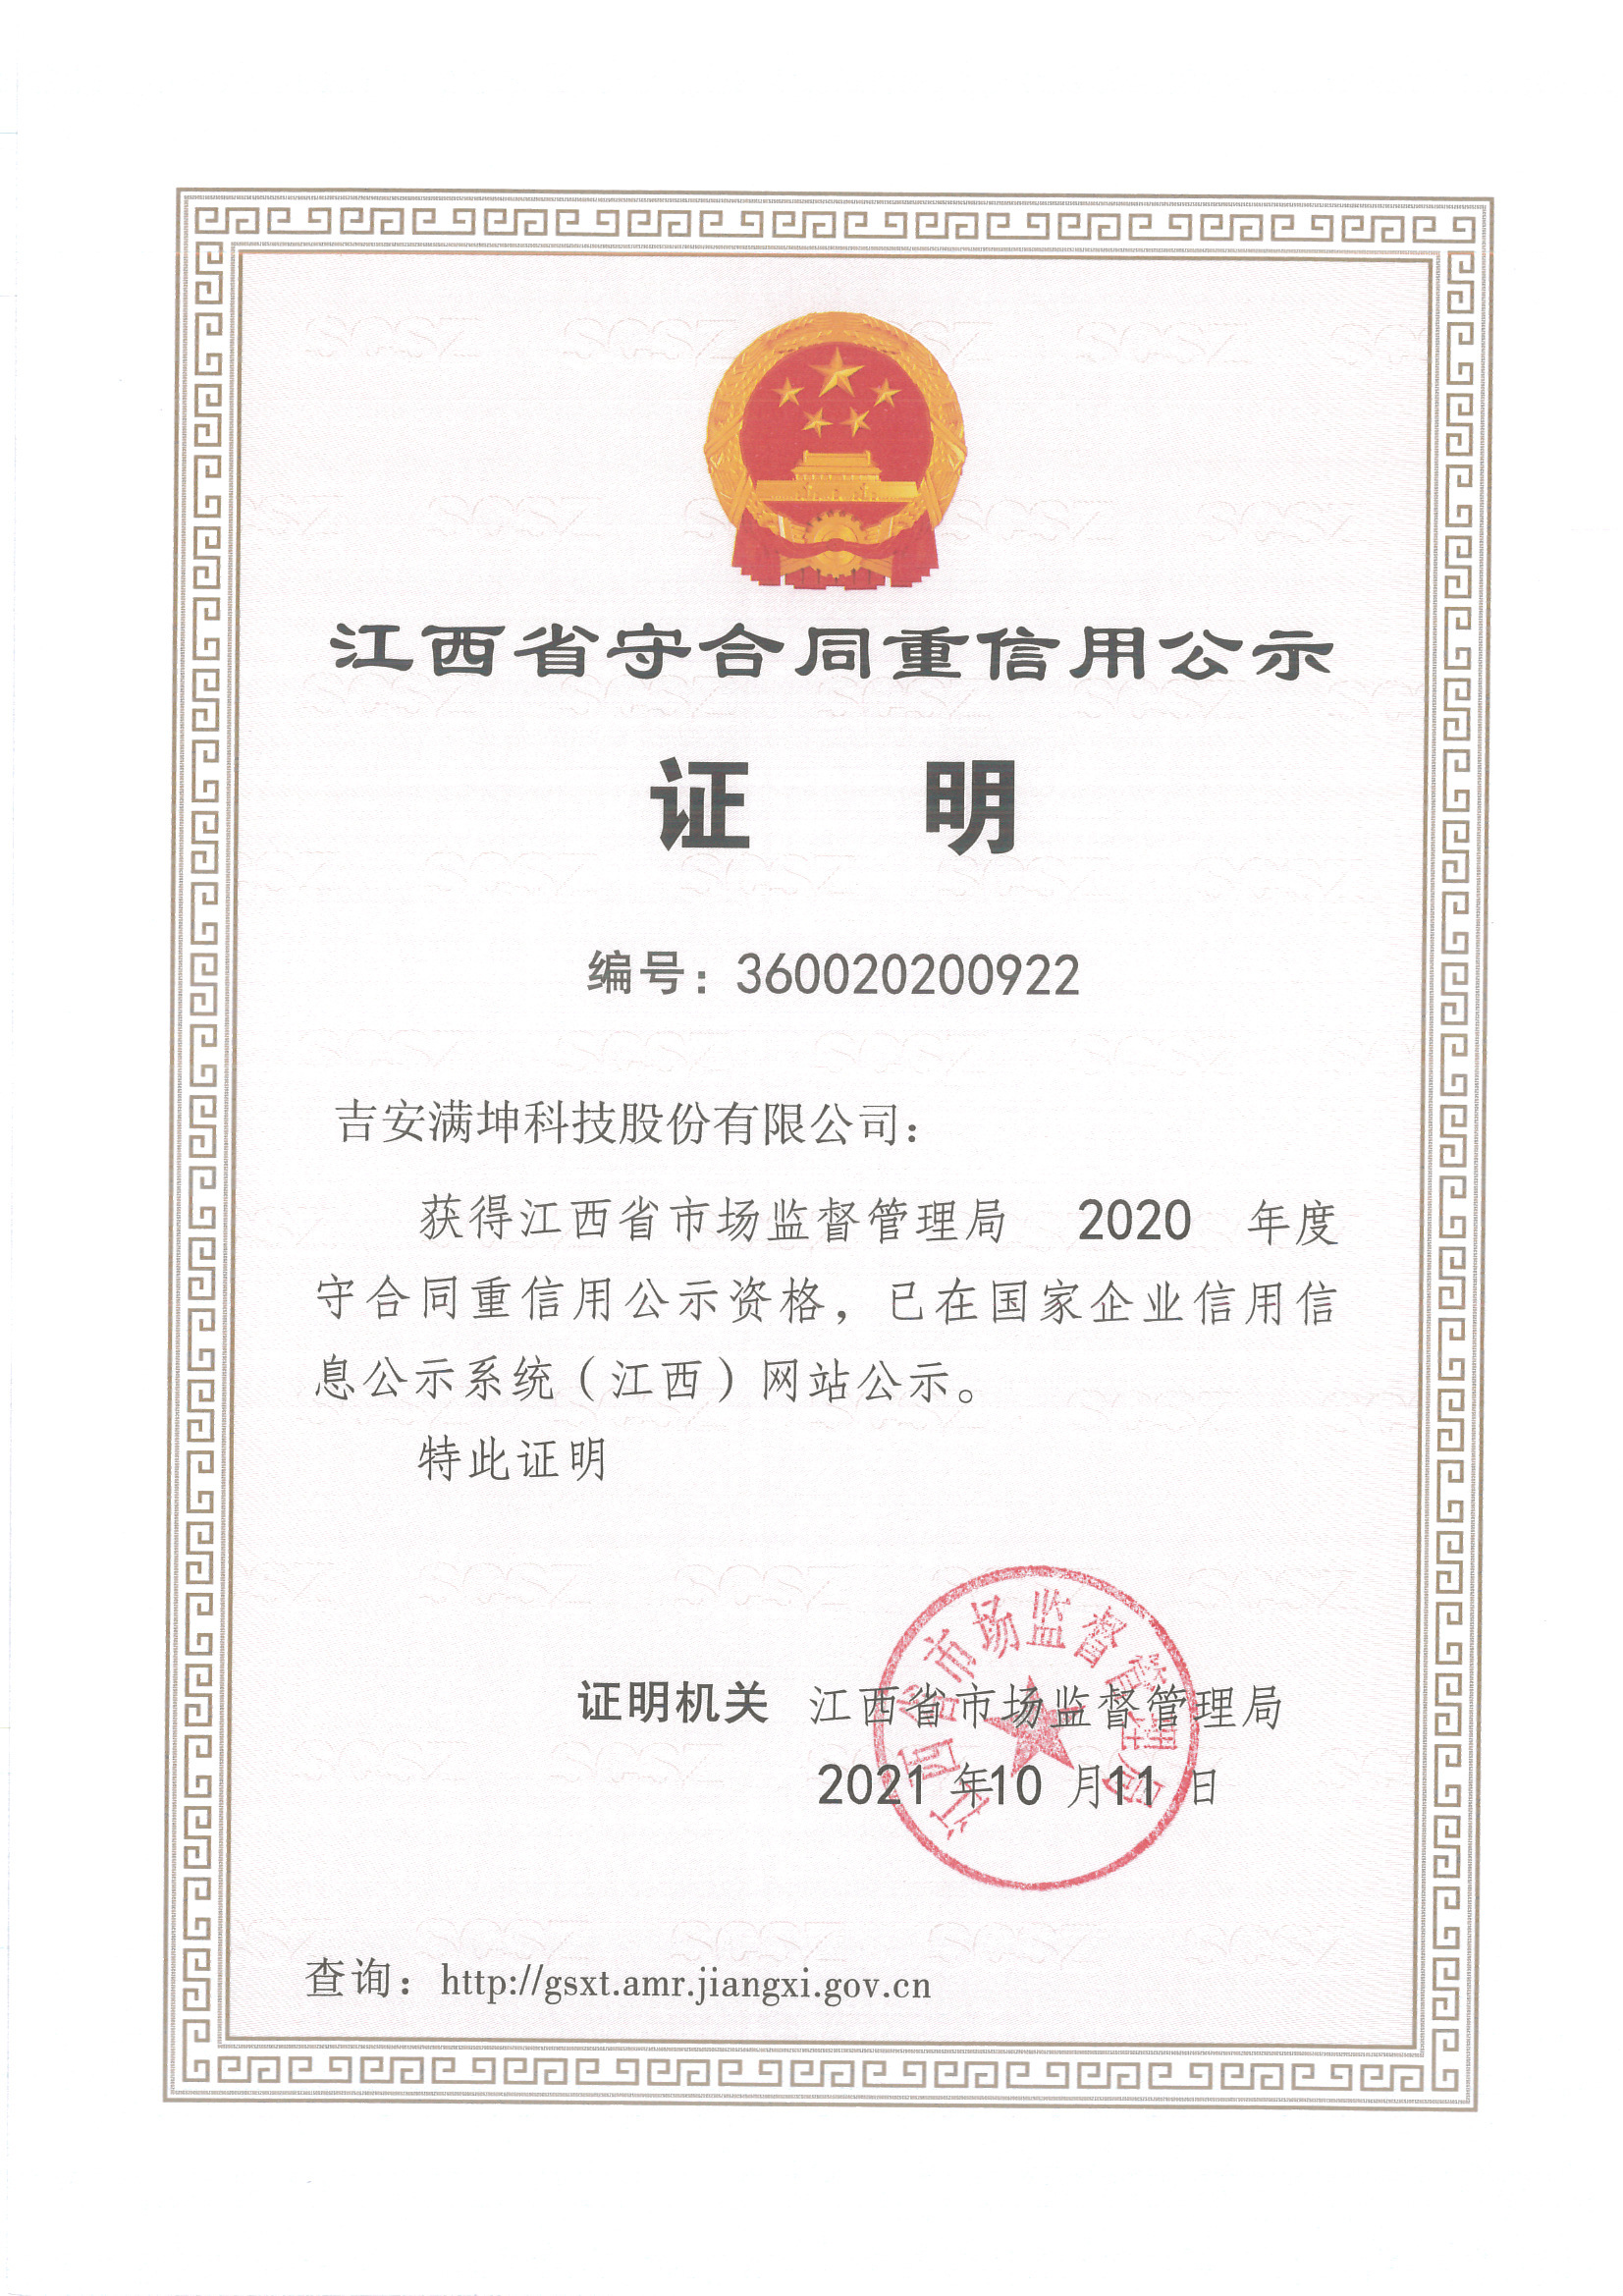 Publicity Certificate of Jiangxi Province's Observance of Contract and Credit in 2020